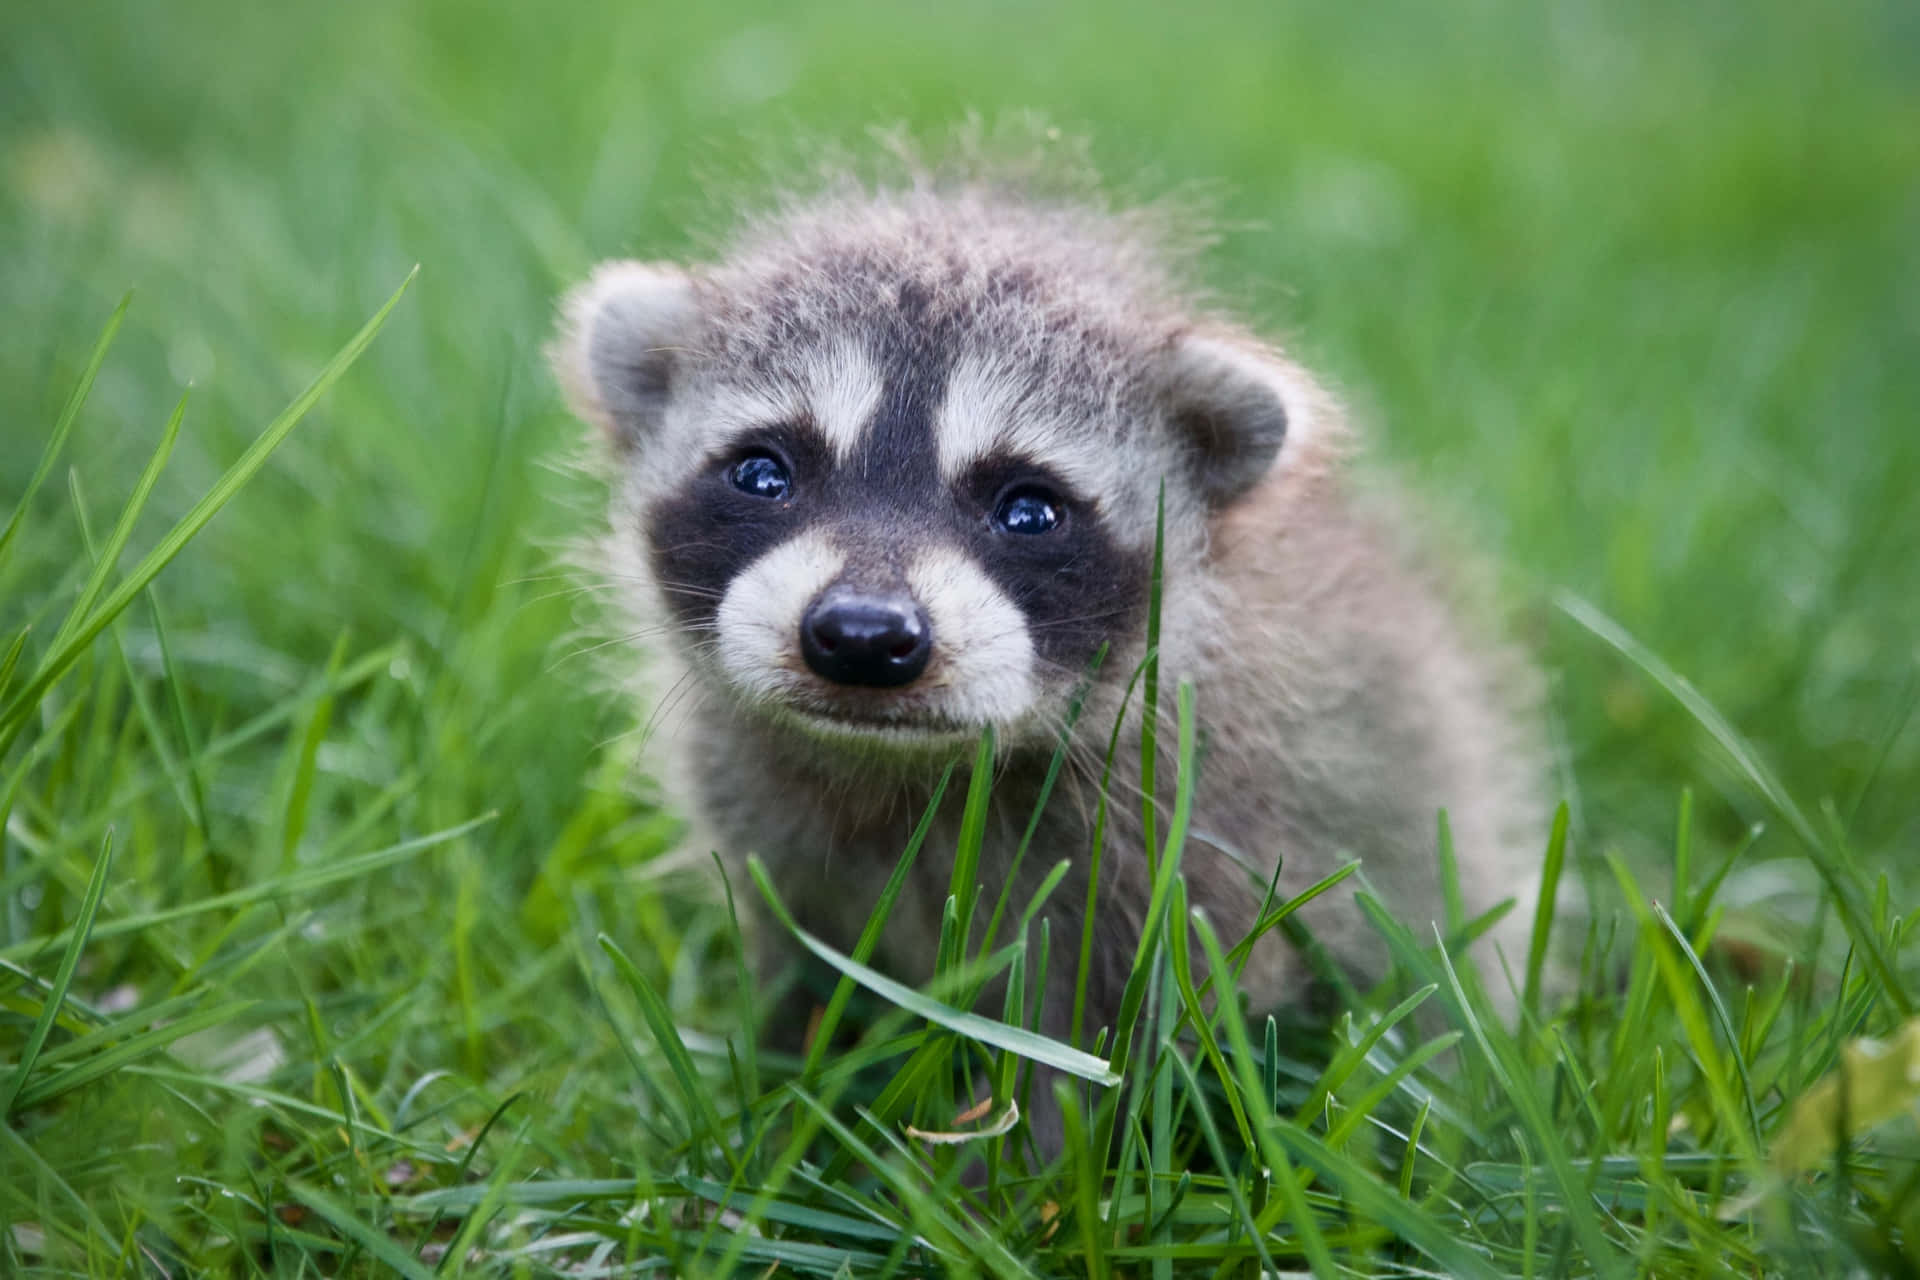 Crying Cute Raccoon On Grass Picture